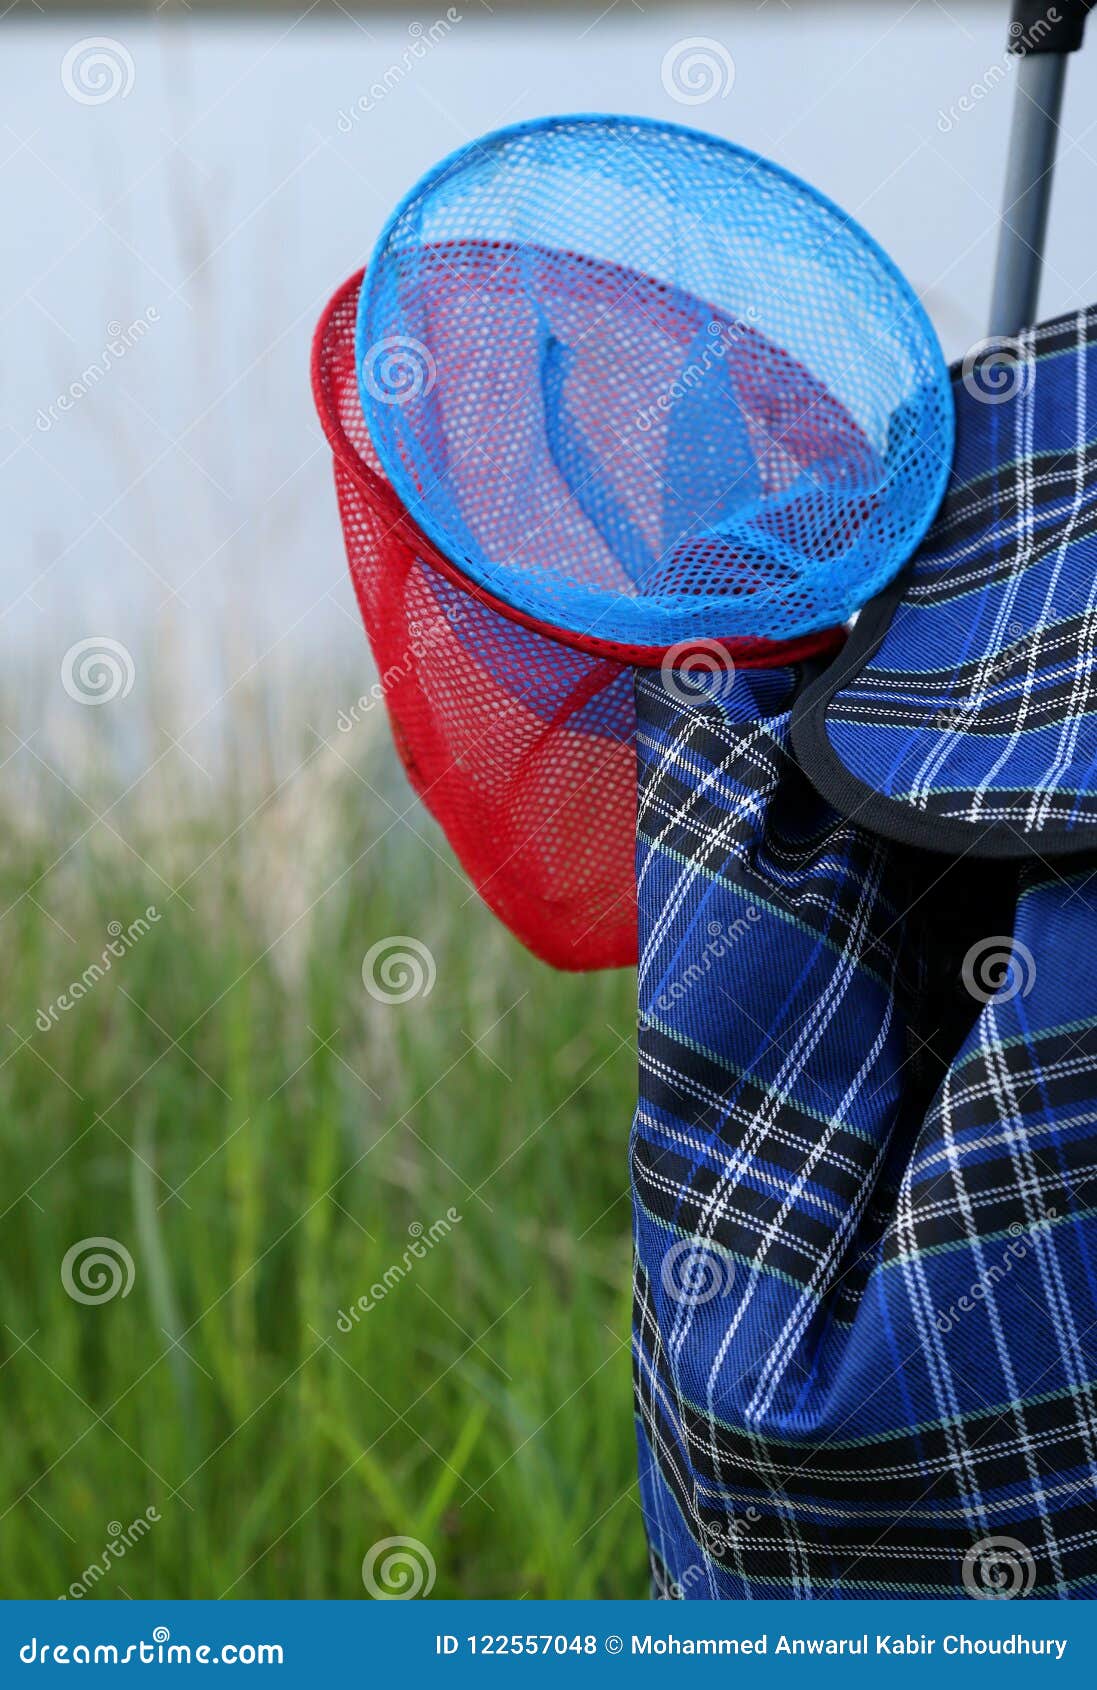 https://thumbs.dreamstime.com/z/children-fishing-net-trolley-bag-children-fishing-net-trolley-bag-as-vacation-concept-122557048.jpg